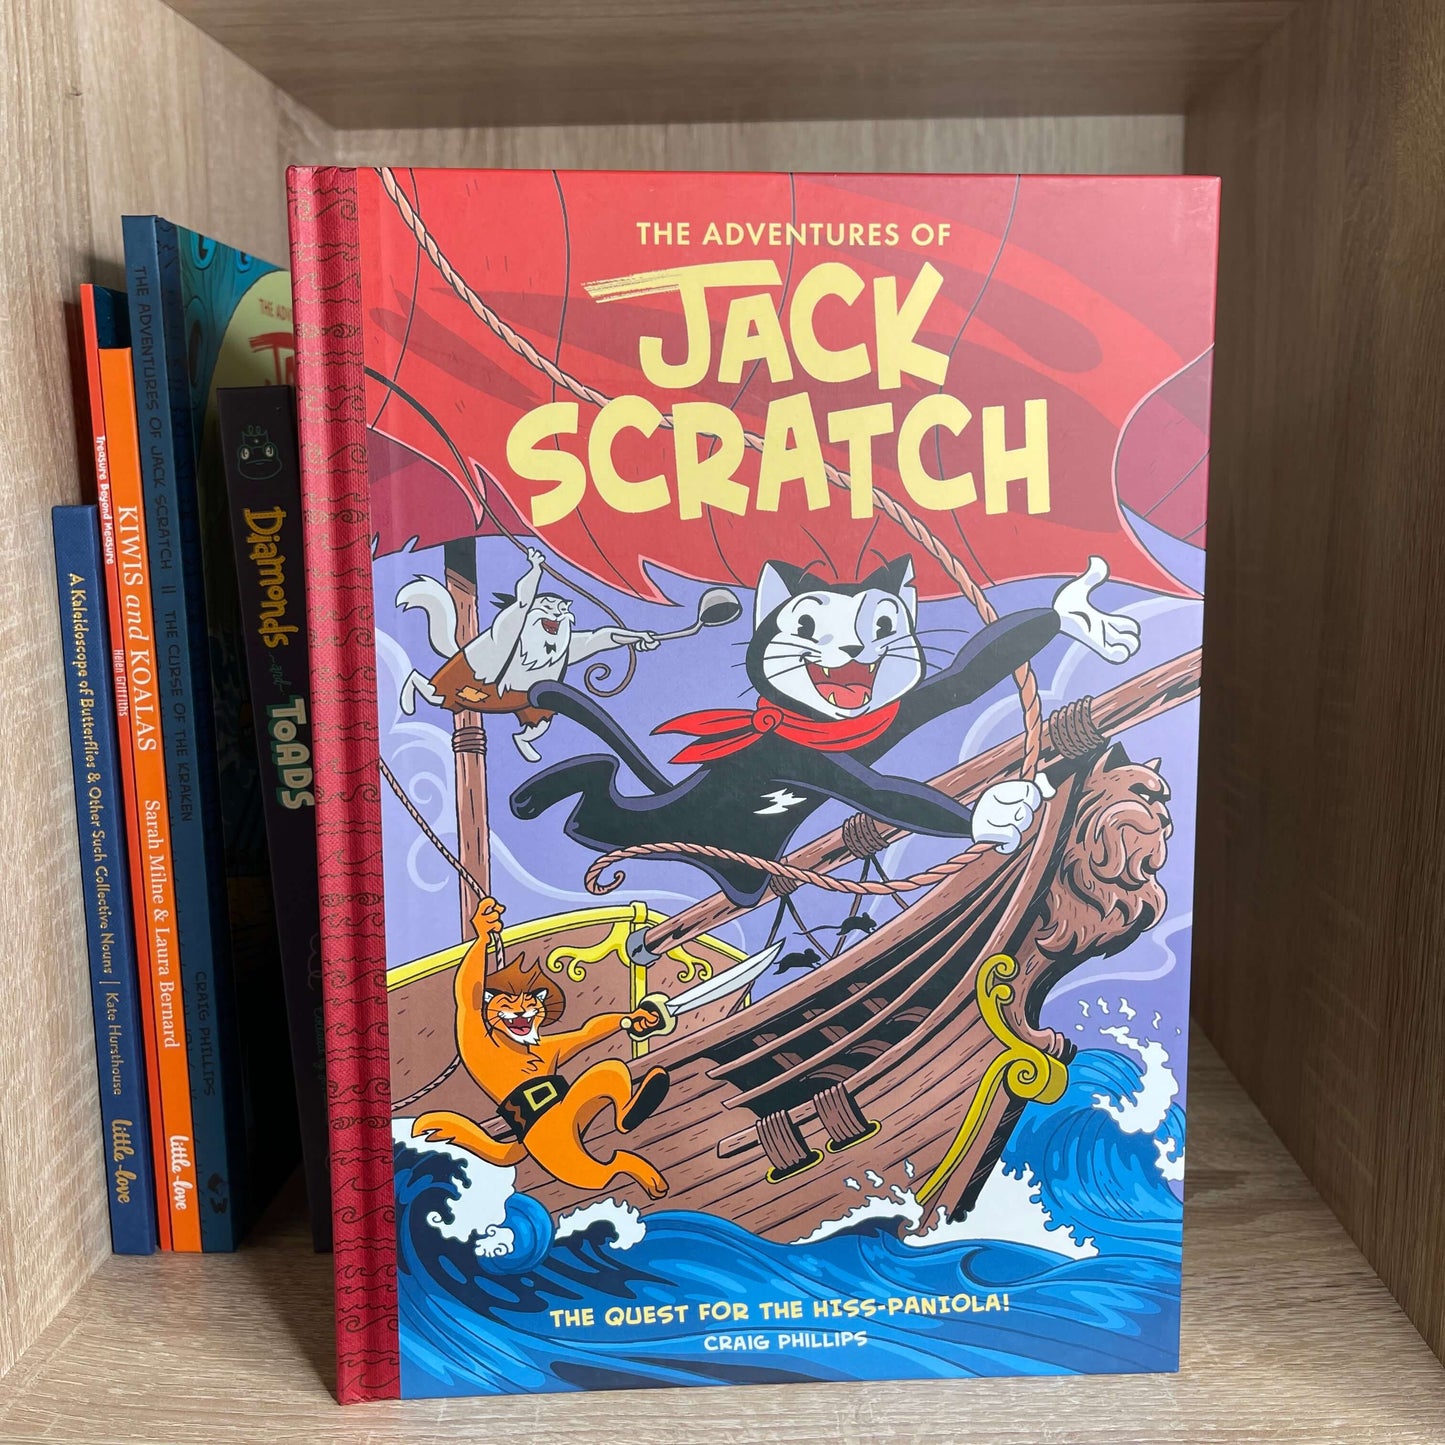 Childrens book The Adventures of Jack Scratch, The Quest for the Hiss-Paniola by Craig Phillips.